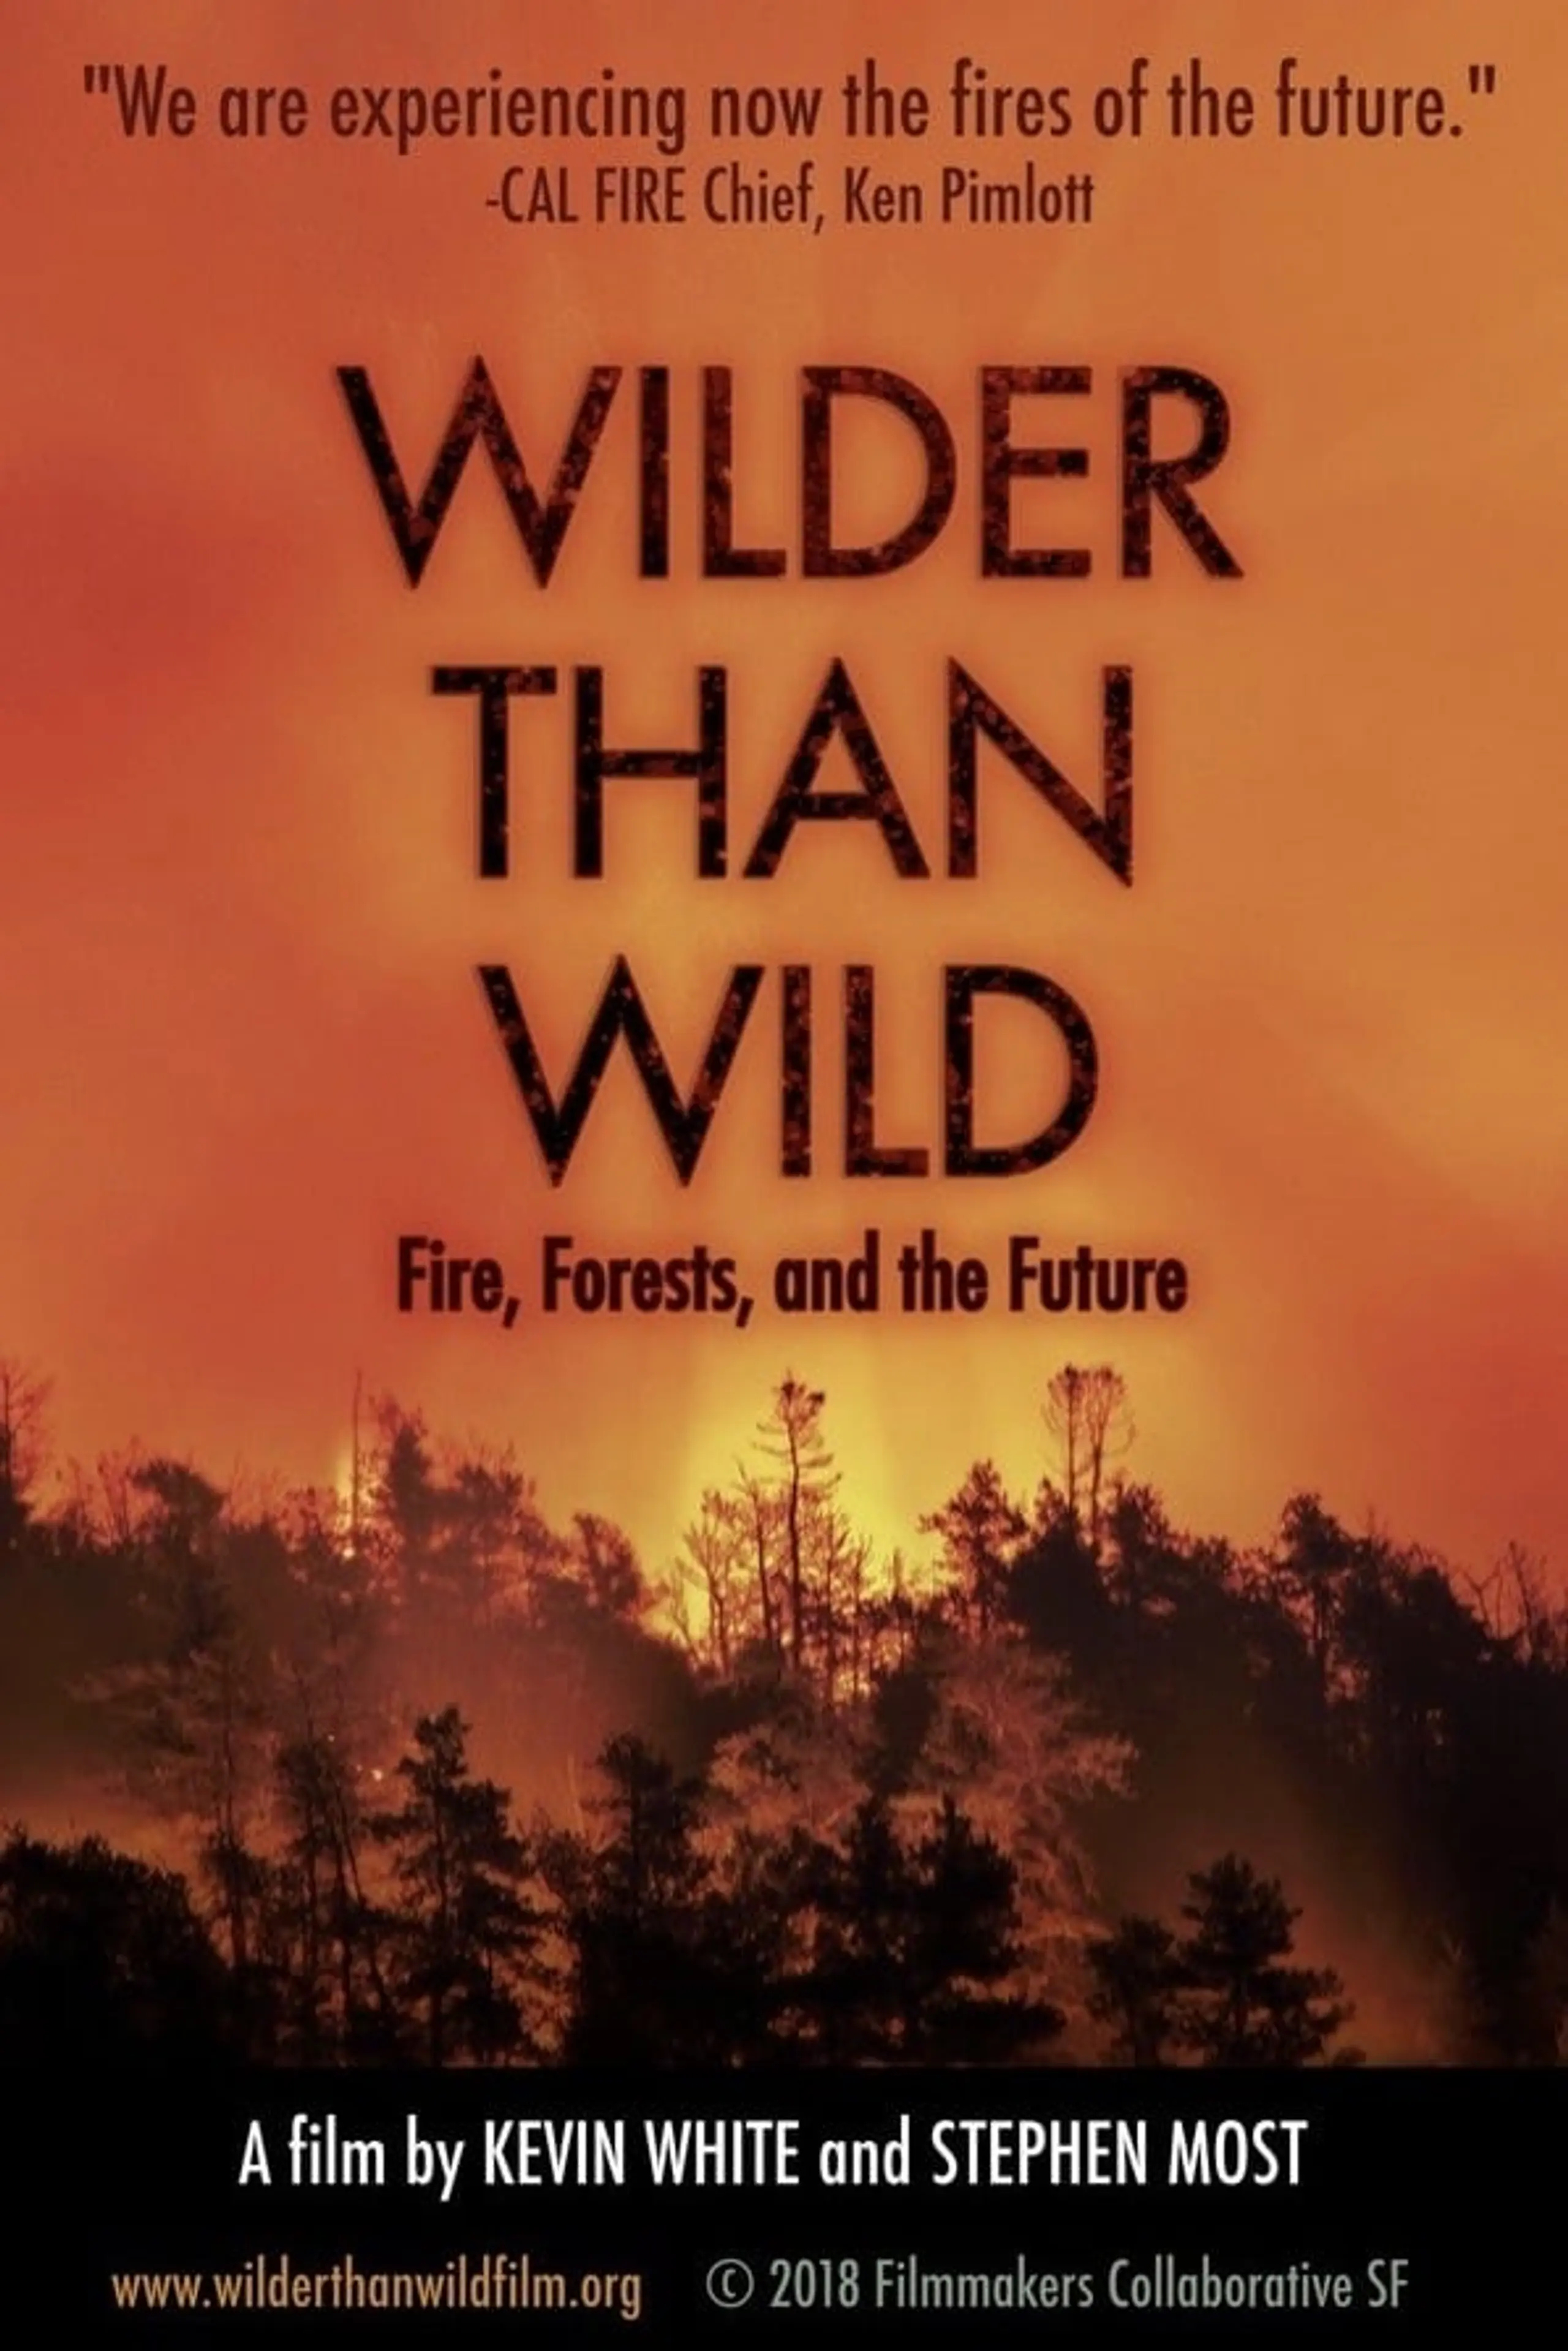 Wilder than Wild: Fire, Forests, and the Future